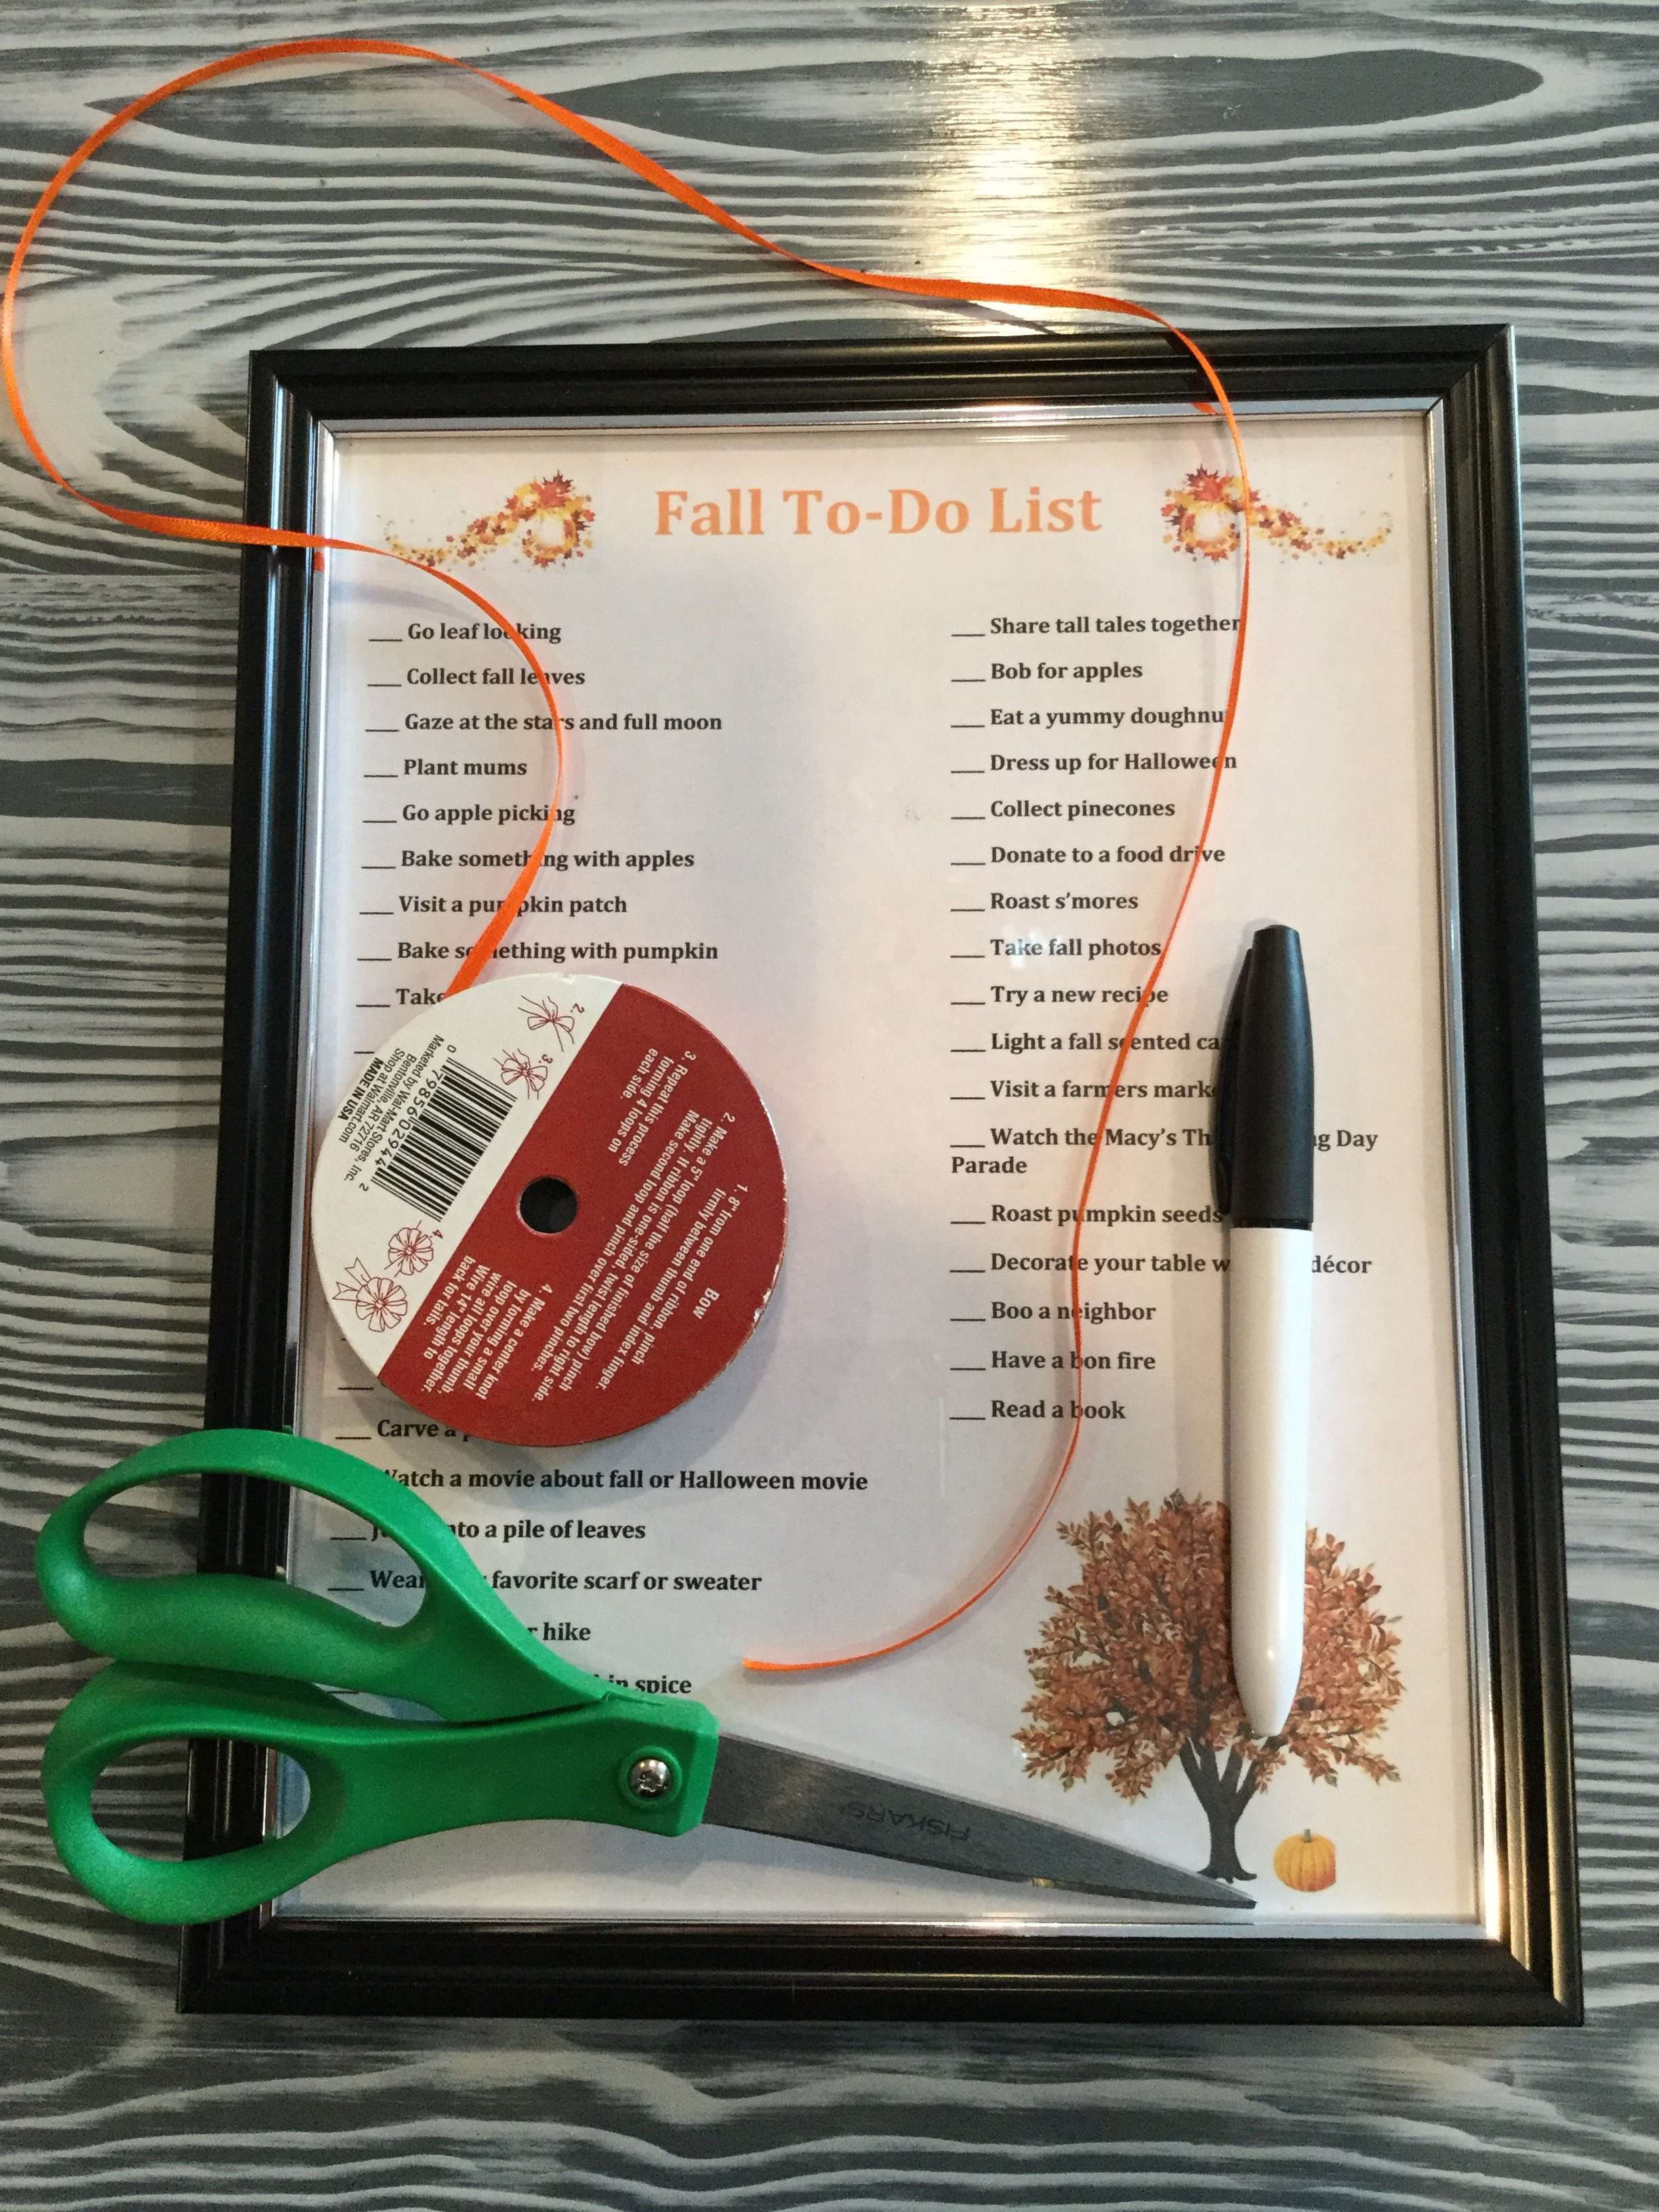 Cut some ribbon to attach your dry erase marker.